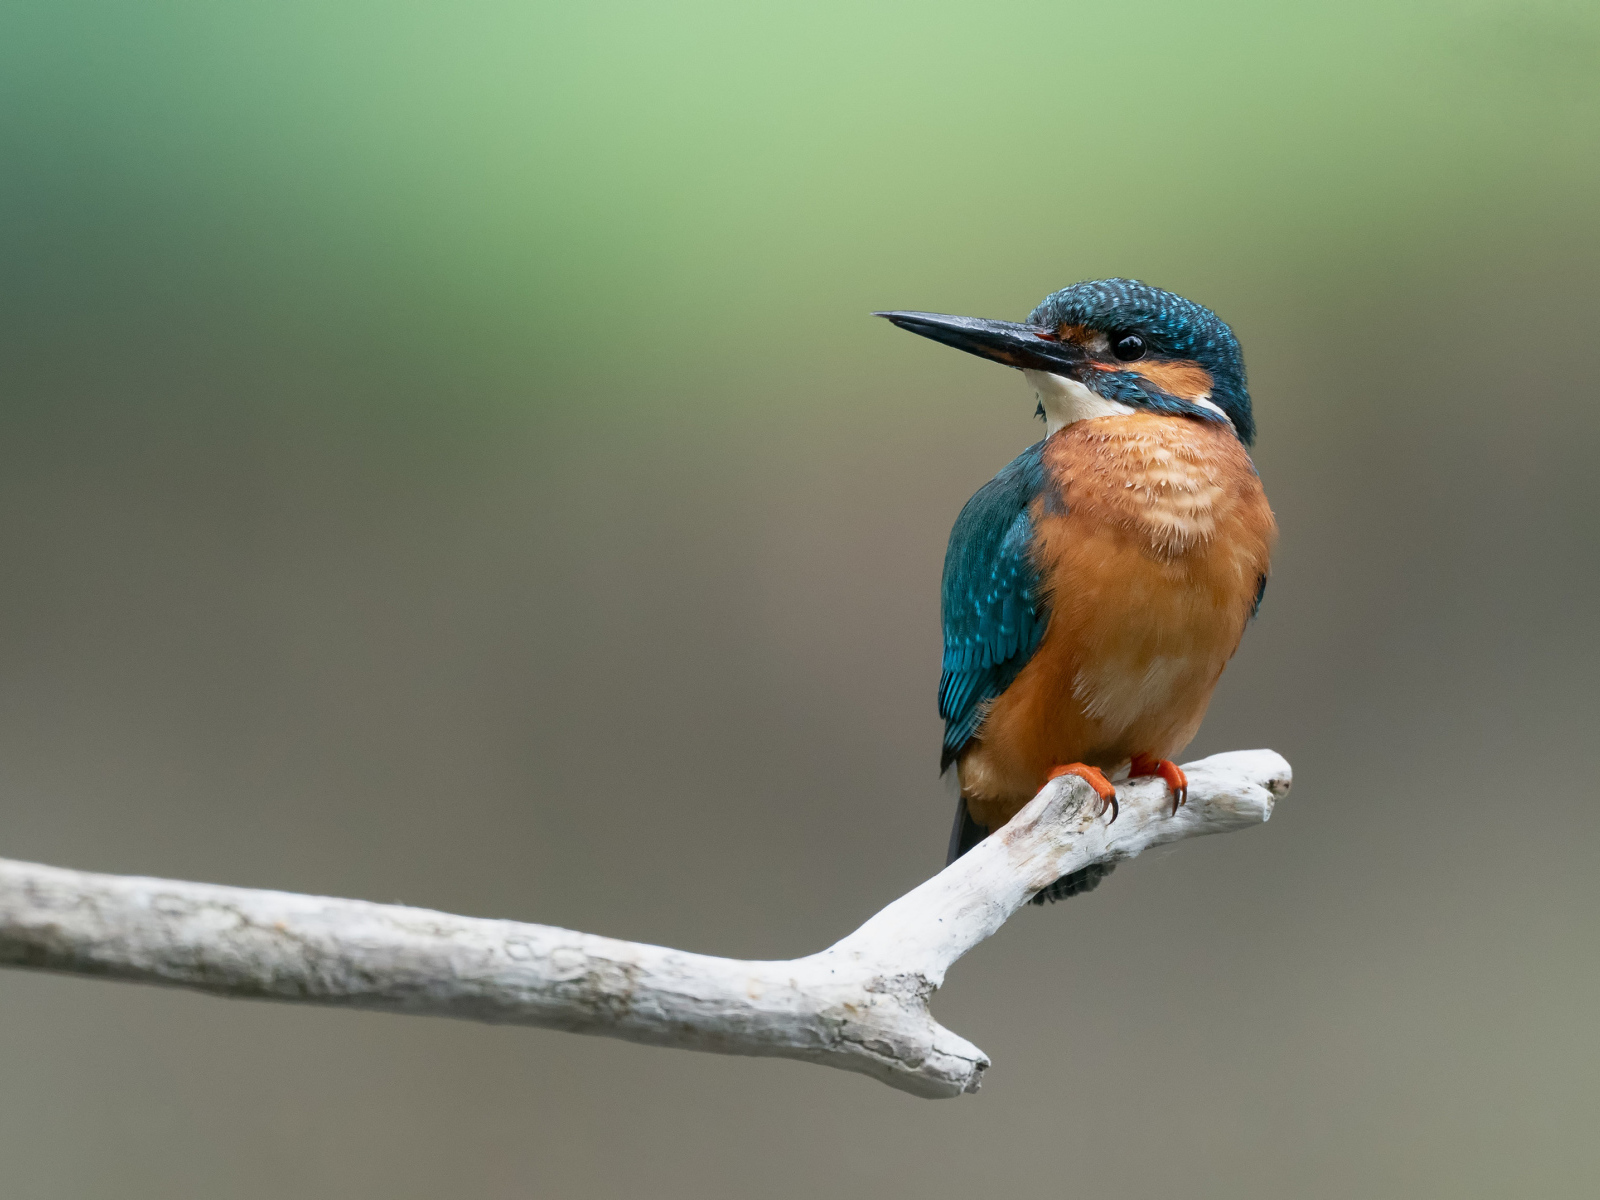 Kingfisher bird sits on a branch